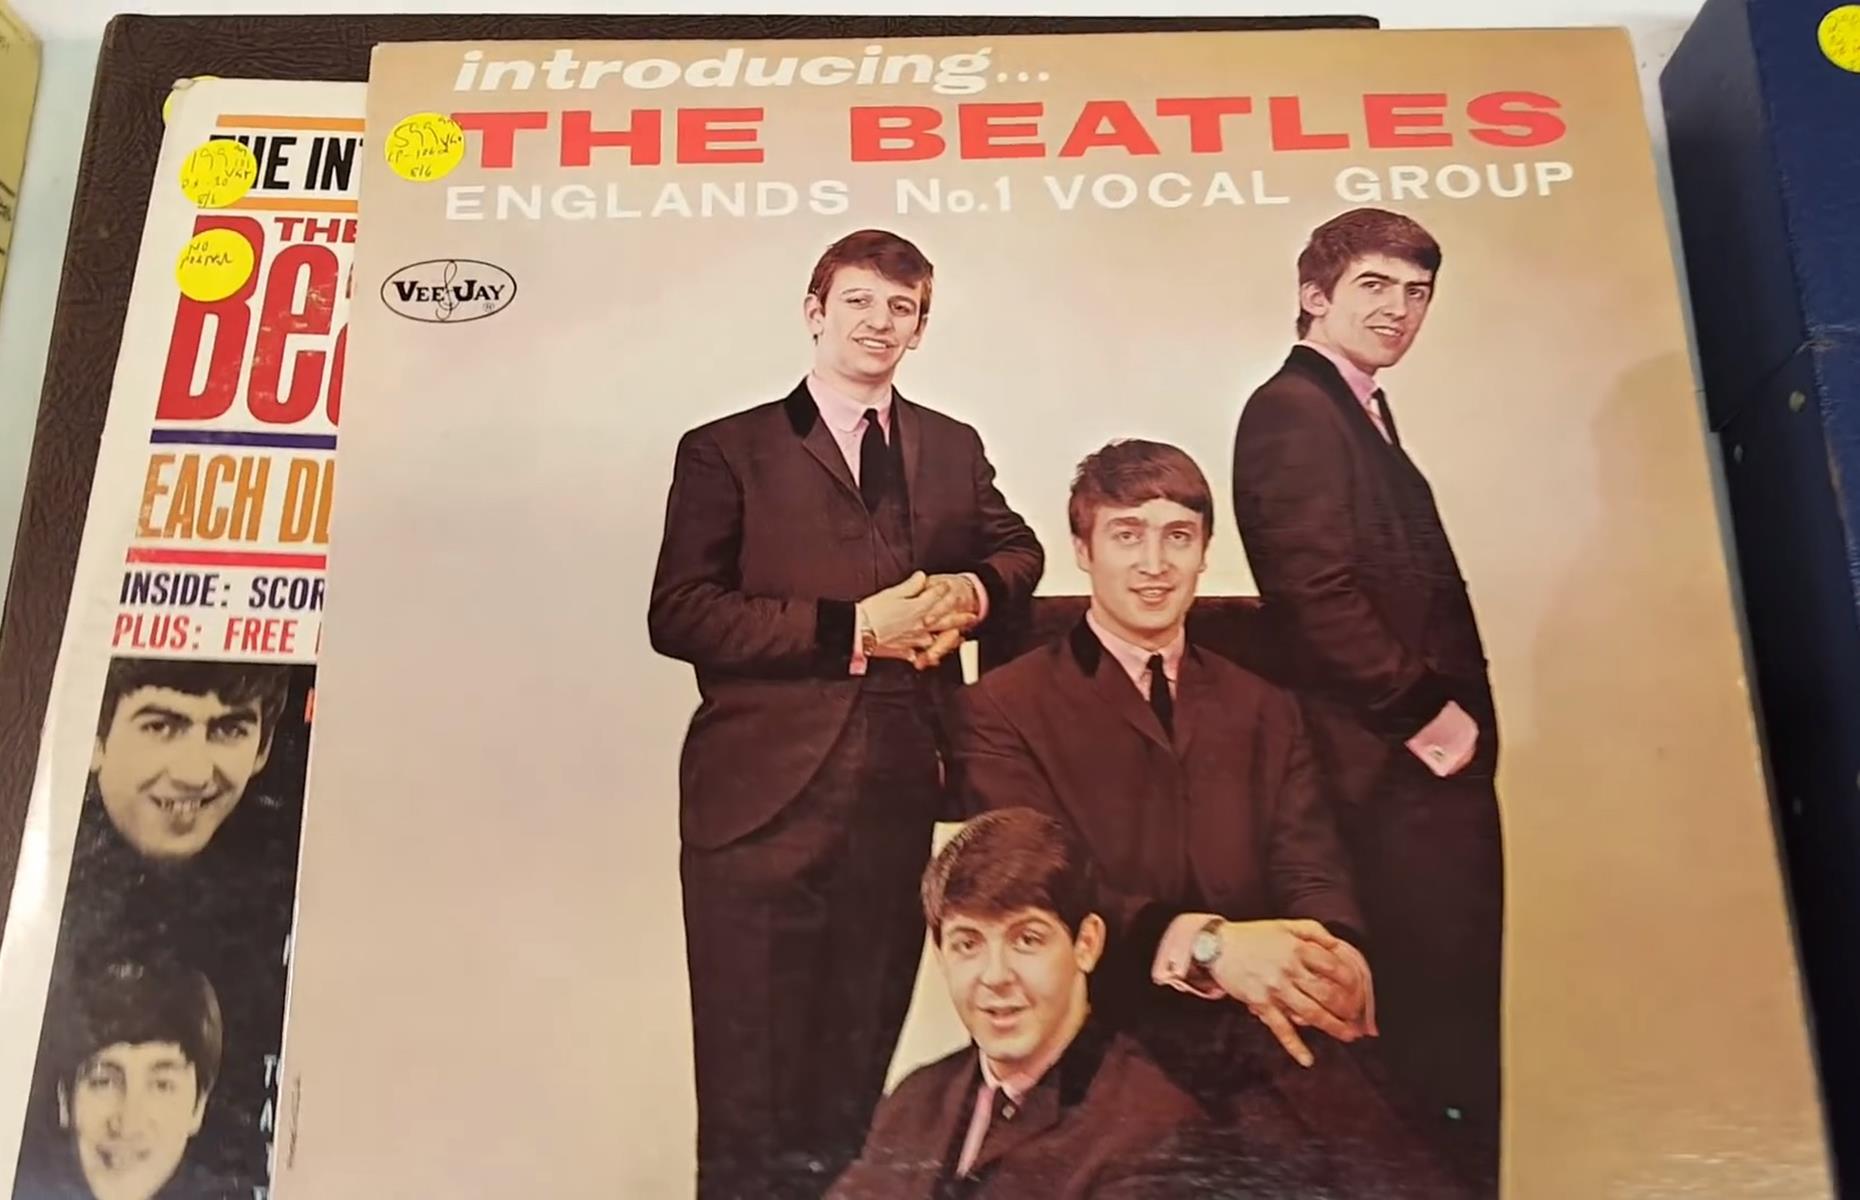 The Beatles – Introducing: up to $15,000 (£12,744)